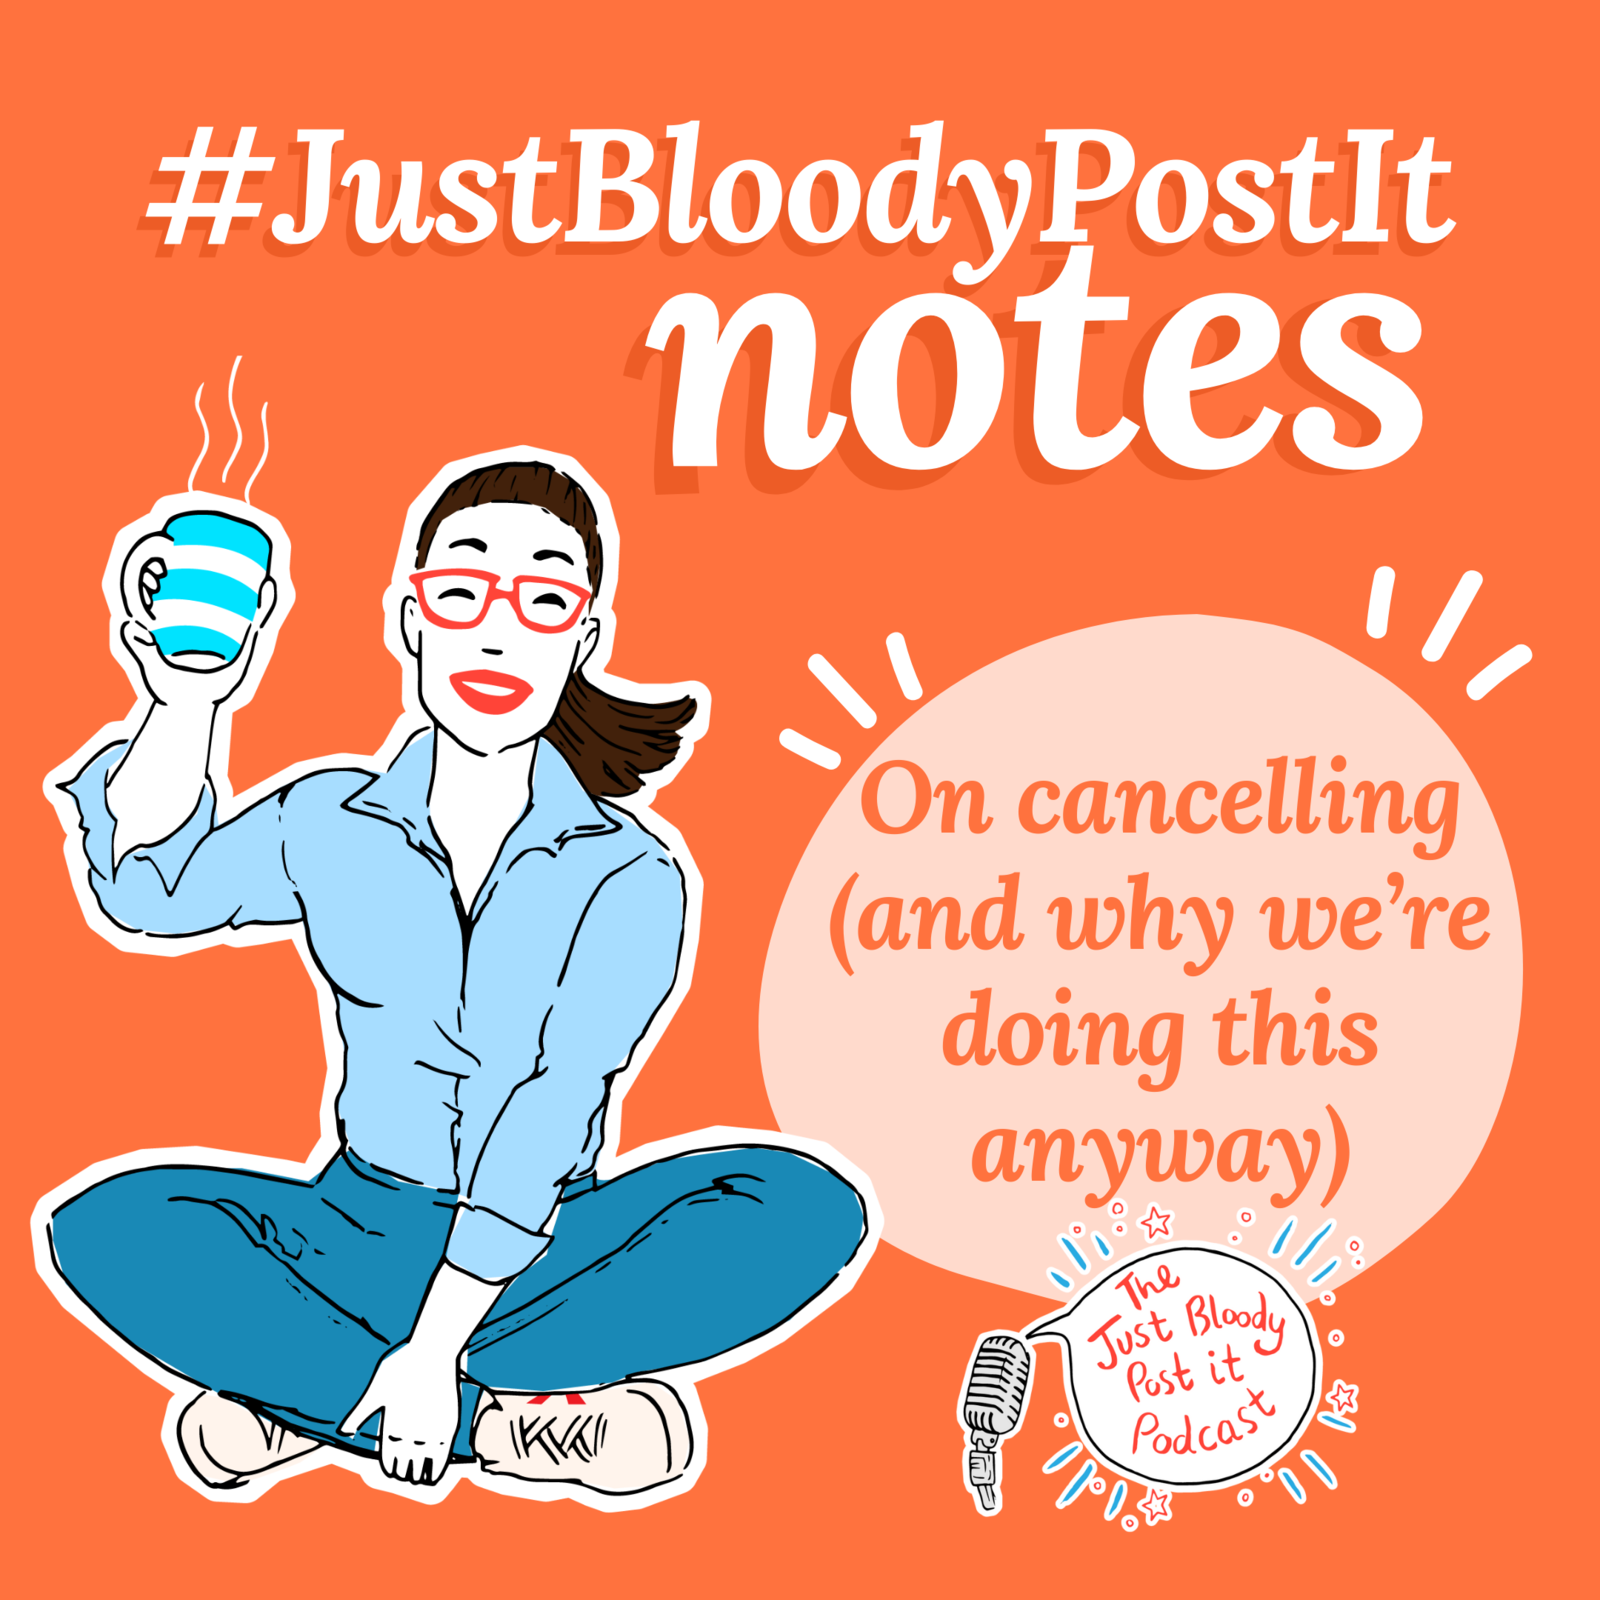 S4 Ep70: On cancelling (and why we're doing this anyway) a #JustBloodyPostIt Note